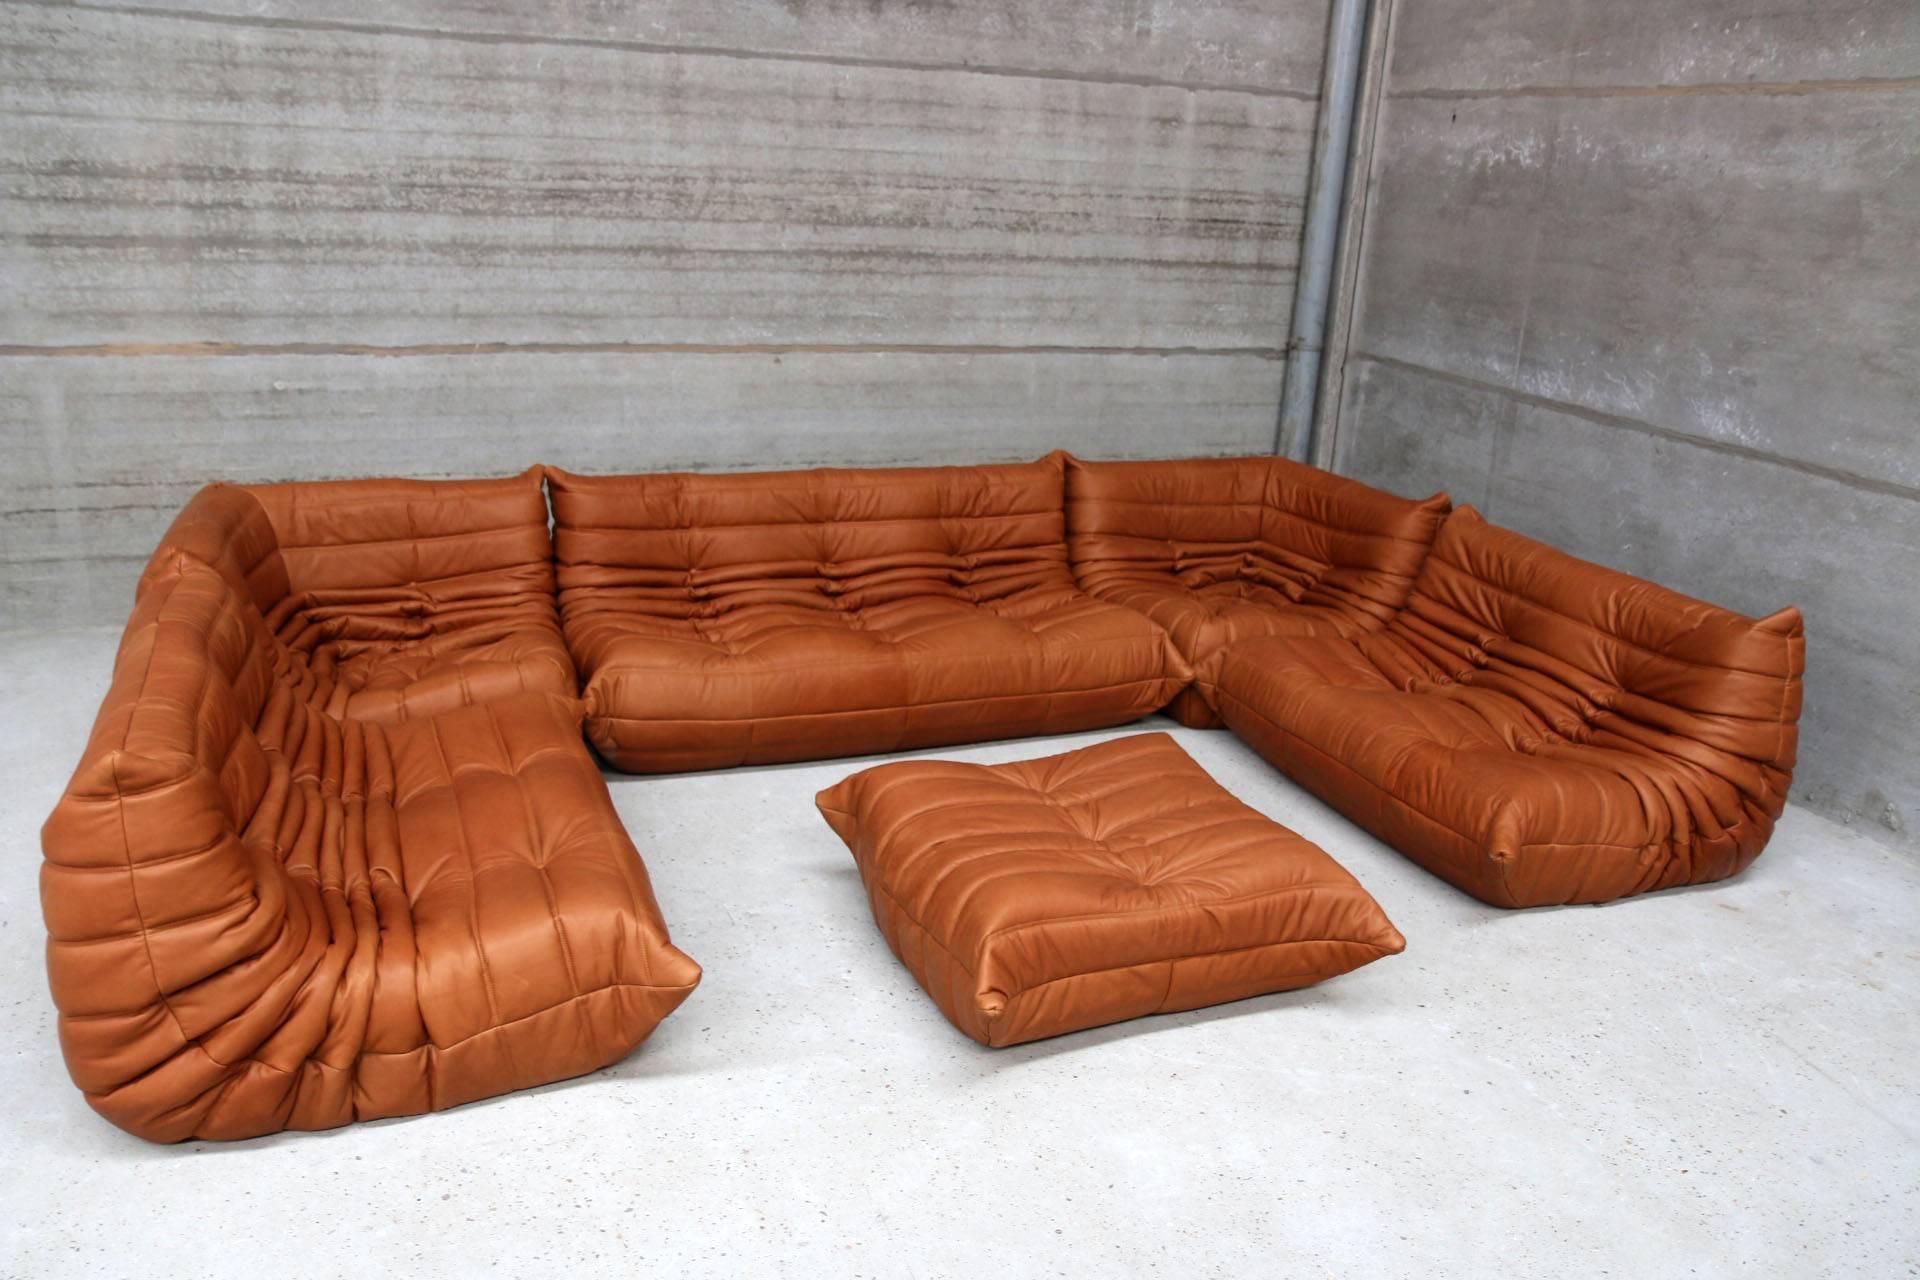 This set was designed by Michel Ducaroy in 1974 and was manufactured by Ligne Roset. Reupholstered in our rich full grain cognac leather.
This set consists following pieces
1 x three-seat 174 x 102 x 70cm
2 x two-seat 131 x 102 x 70cm
2 x corner 102